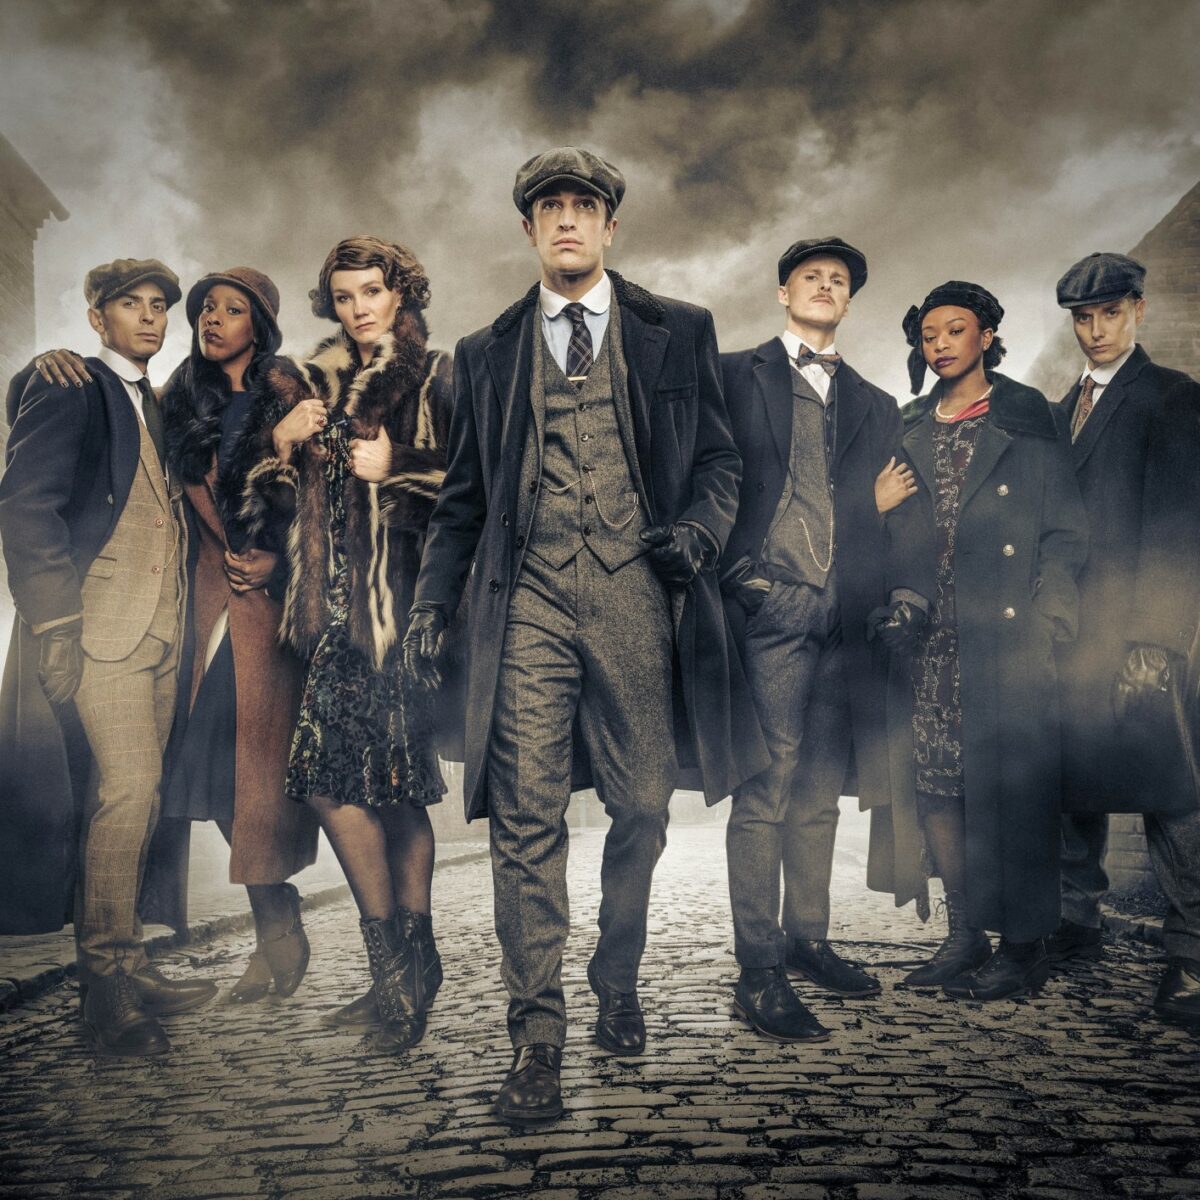 Preview: Peaky Blinders: The Redemption of Thomas Shelby, Mayflower Theatre, Southampton